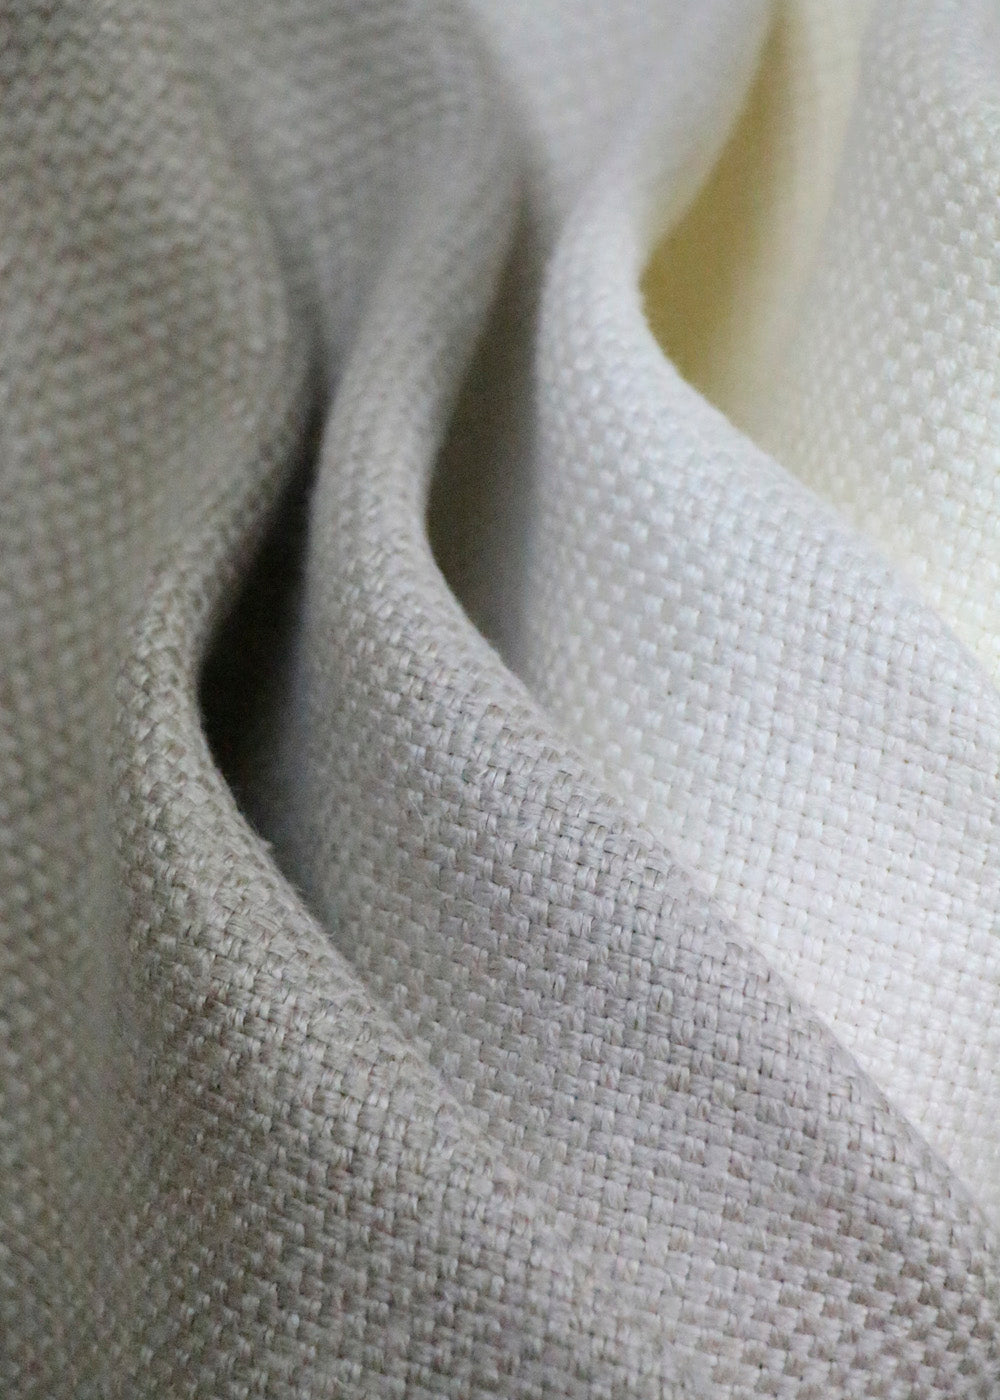 close up detail of a basketweave linen fabric